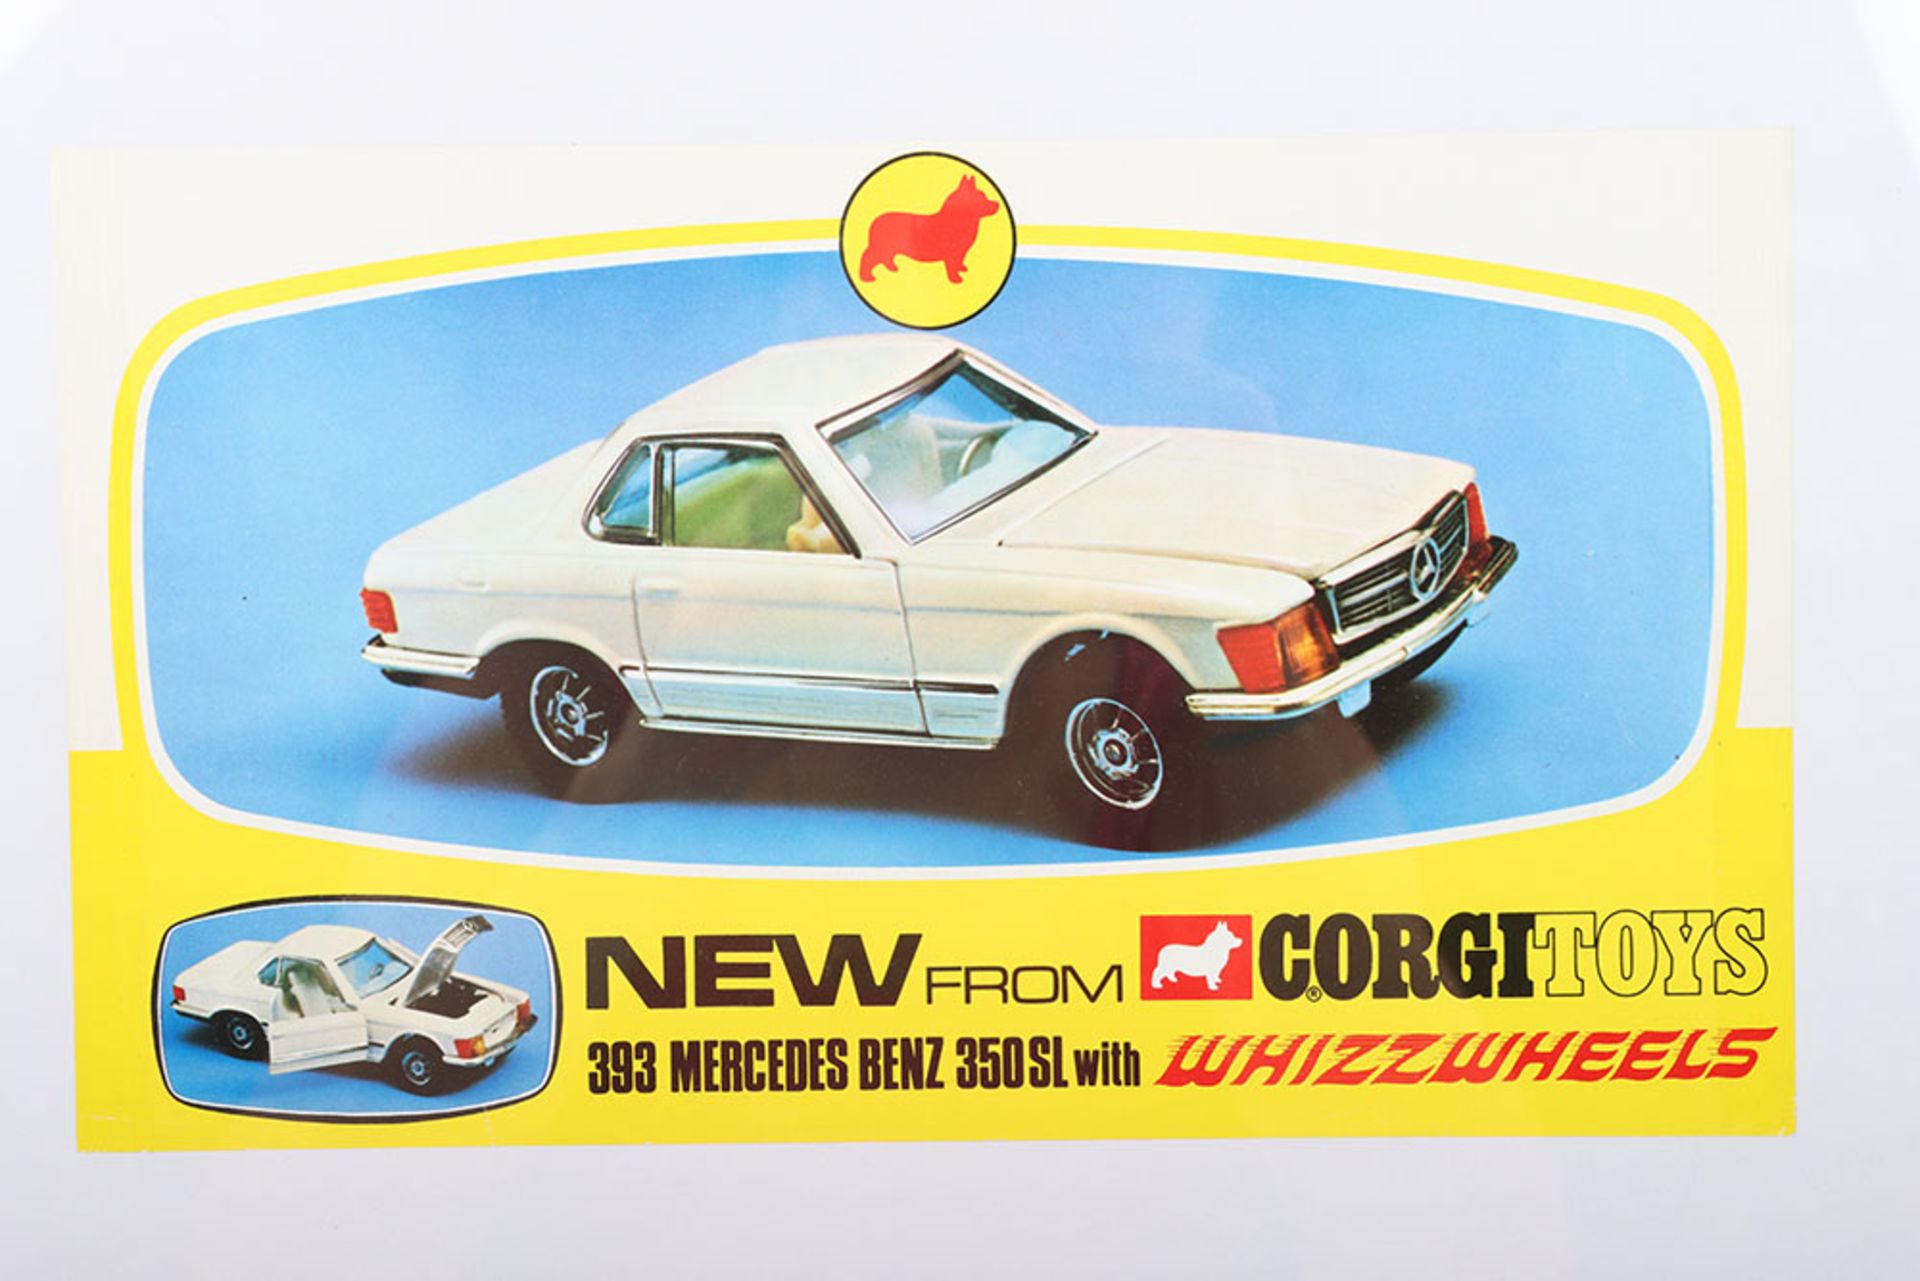 Original New from Corgi Toys 393 Mercedes Benz 350SL with Whizzwheels, Shop window poster - Image 2 of 5